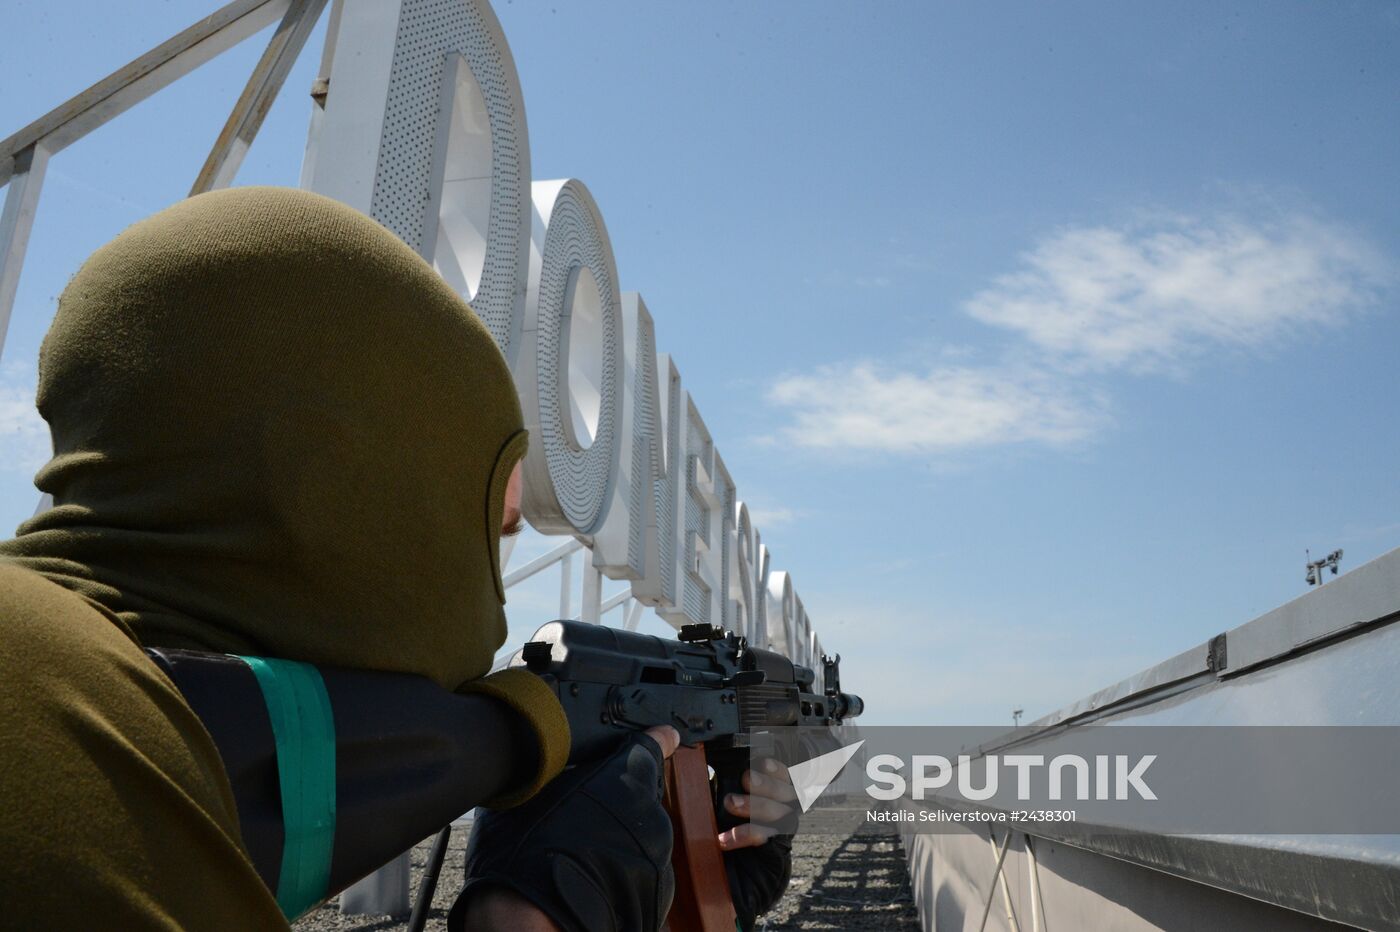 Resistance forces of the Donetsk People's Republic establish control over Donetsk International Airport